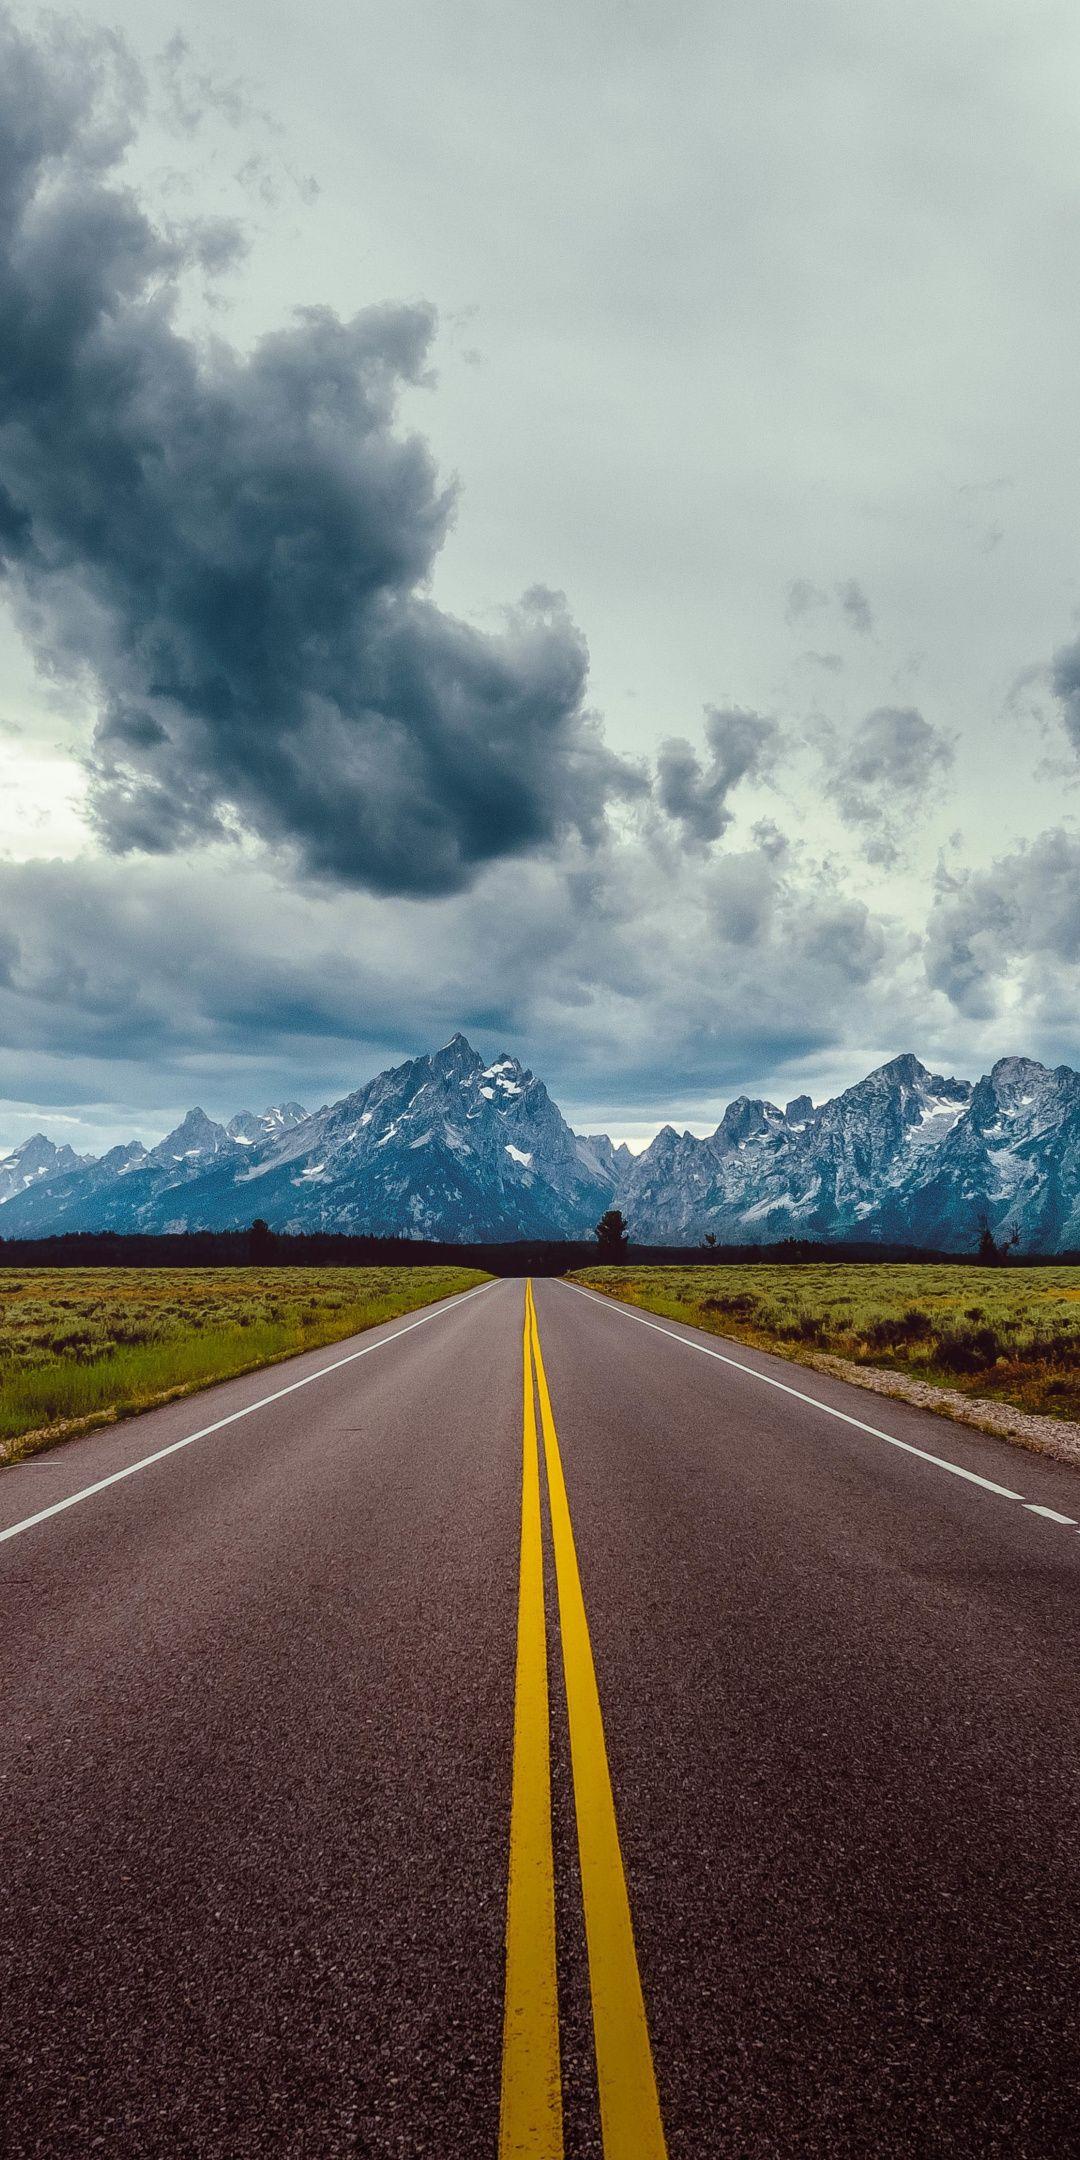 Marks, highway, road, landscape, mountains, clouds, nature